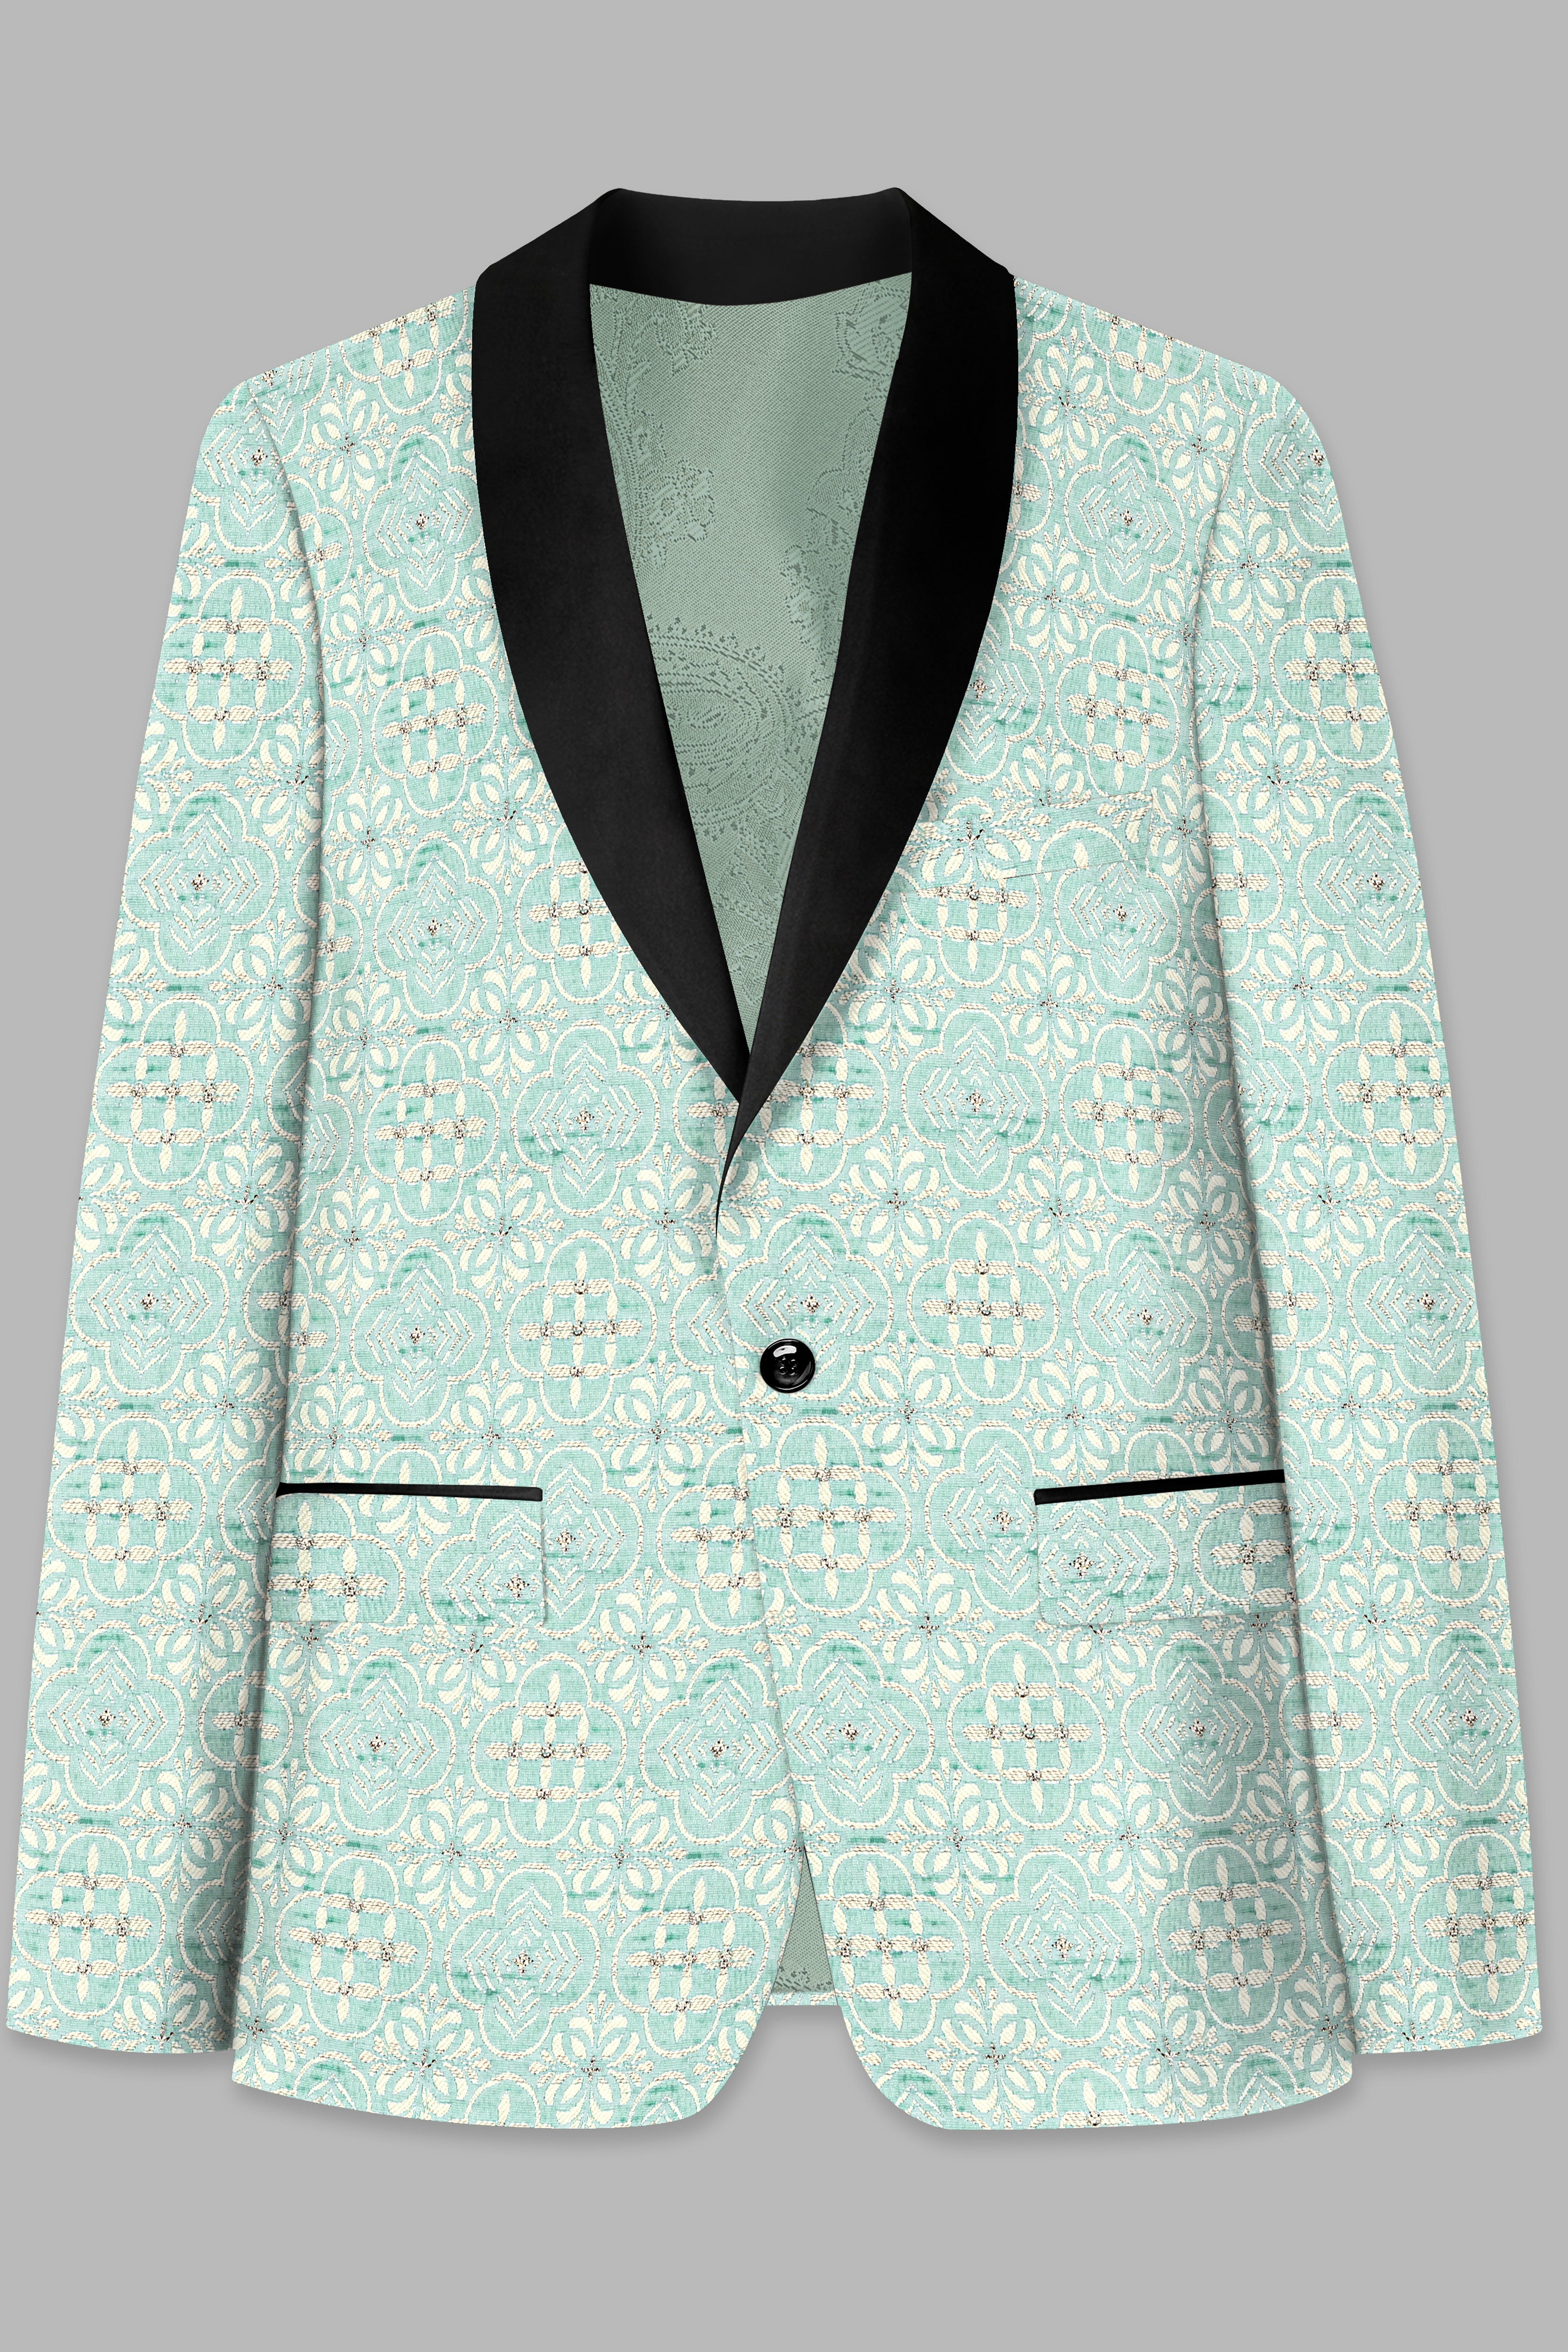 Jagged Blue and Derby Cream Jacquard Weave Tuxedo Blazer BL3691-BKL-36, BL3691-BKL-38, BL3691-BKL-40, BL3691-BKL-42, BL3691-BKL-44, BL3691-BKL-46, BL3691-BKL-48, BL3691-BKL-50, BL3691-BKL-52, BL3691-BKL-54, BL3691-BKL-56, BL3691-BKL-58, BL3691-BKL-60